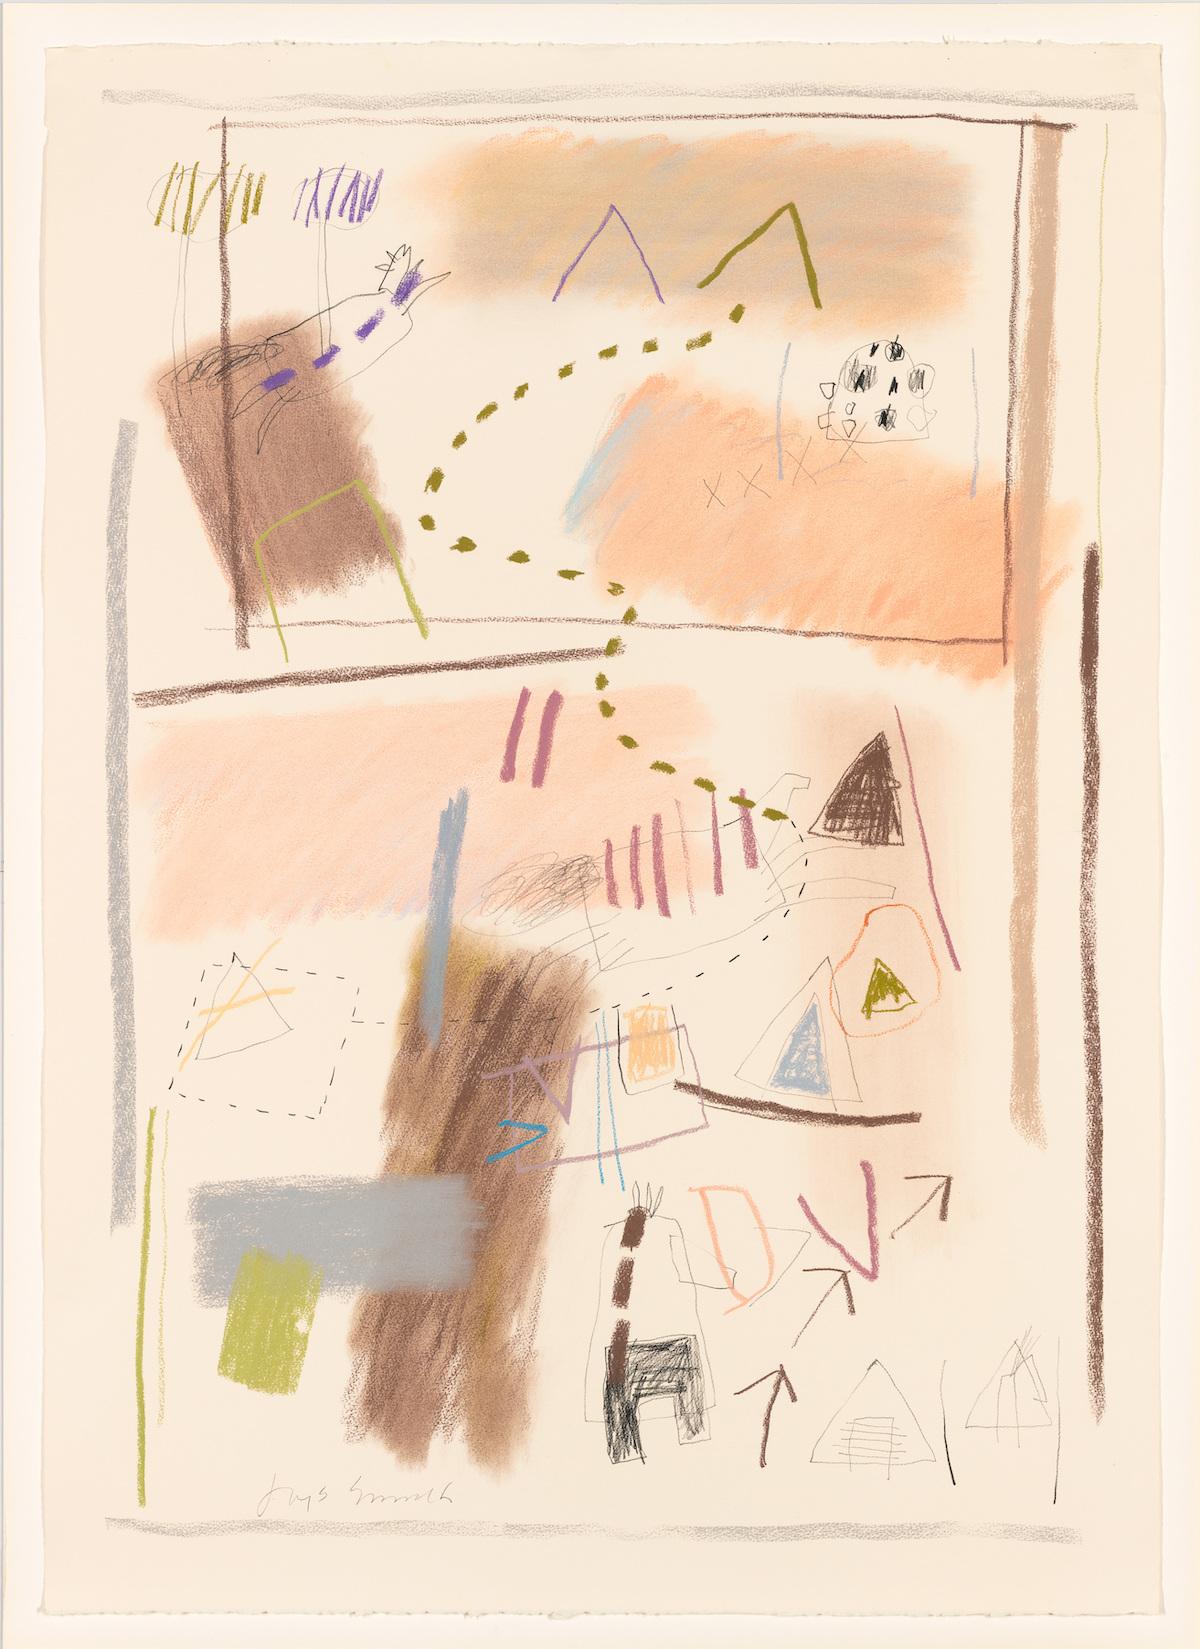 Jaune Quick-to-See Smith, Kalispell #3, 1979. Pastel and charcoal on paper, 41 3/4 × 30 5/8 in. (106 × 77.8 cm). Whitney Museum of American Art, New York; gift of Altria Group, Inc. 2008.138.